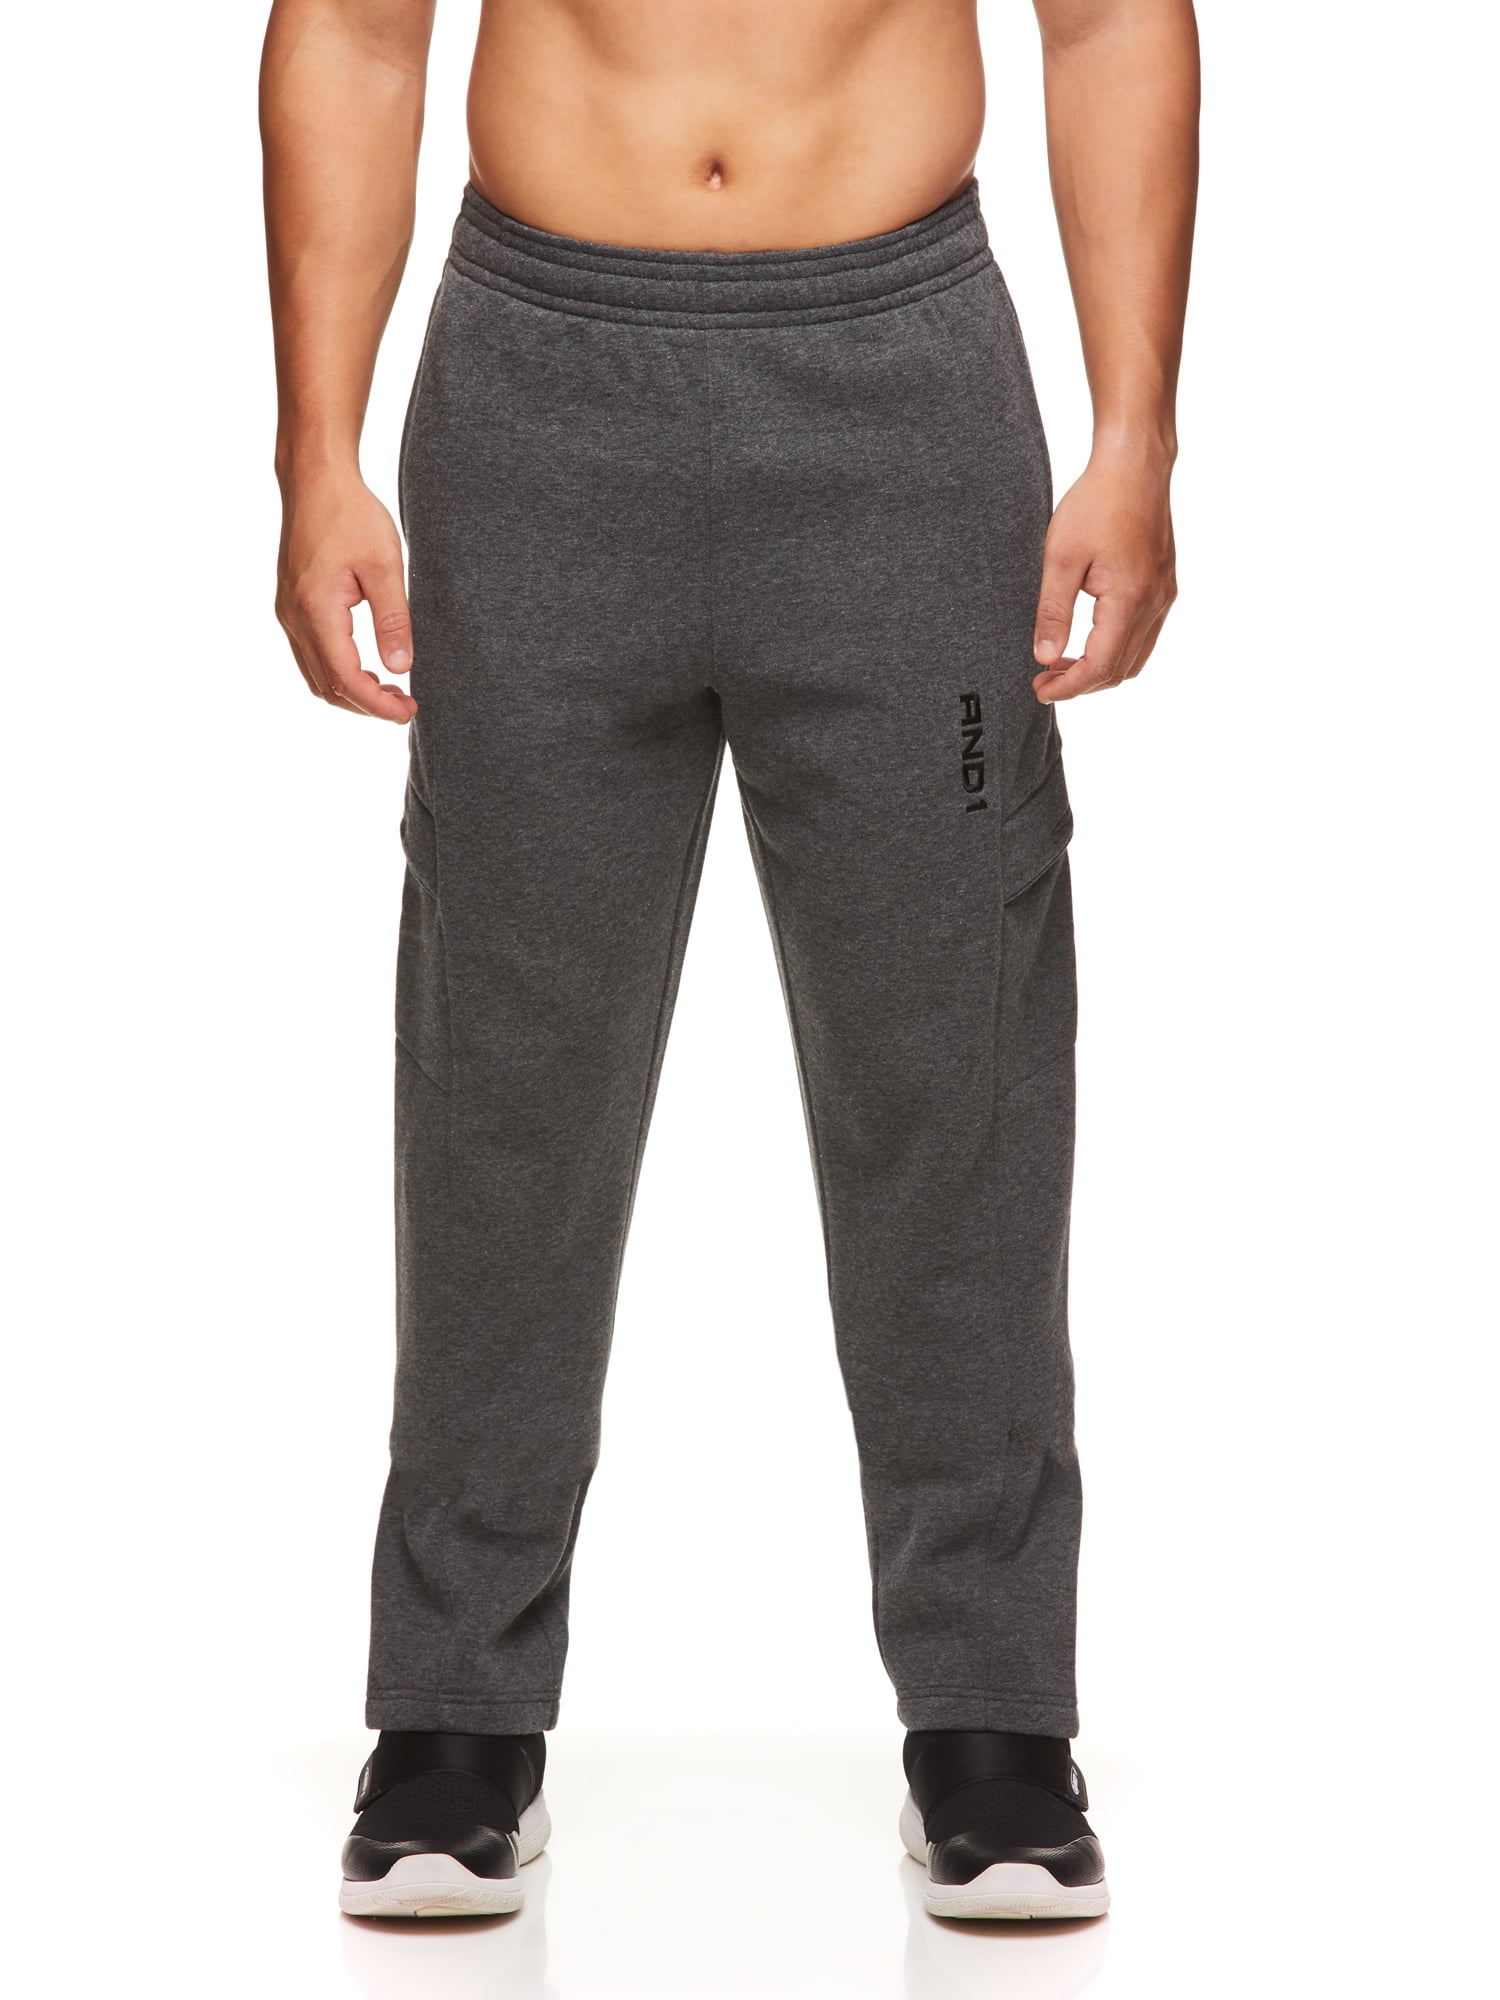 AND1 Men's Active Double Team 2.0 Cargo Fleece Pants, up to Size XL ...